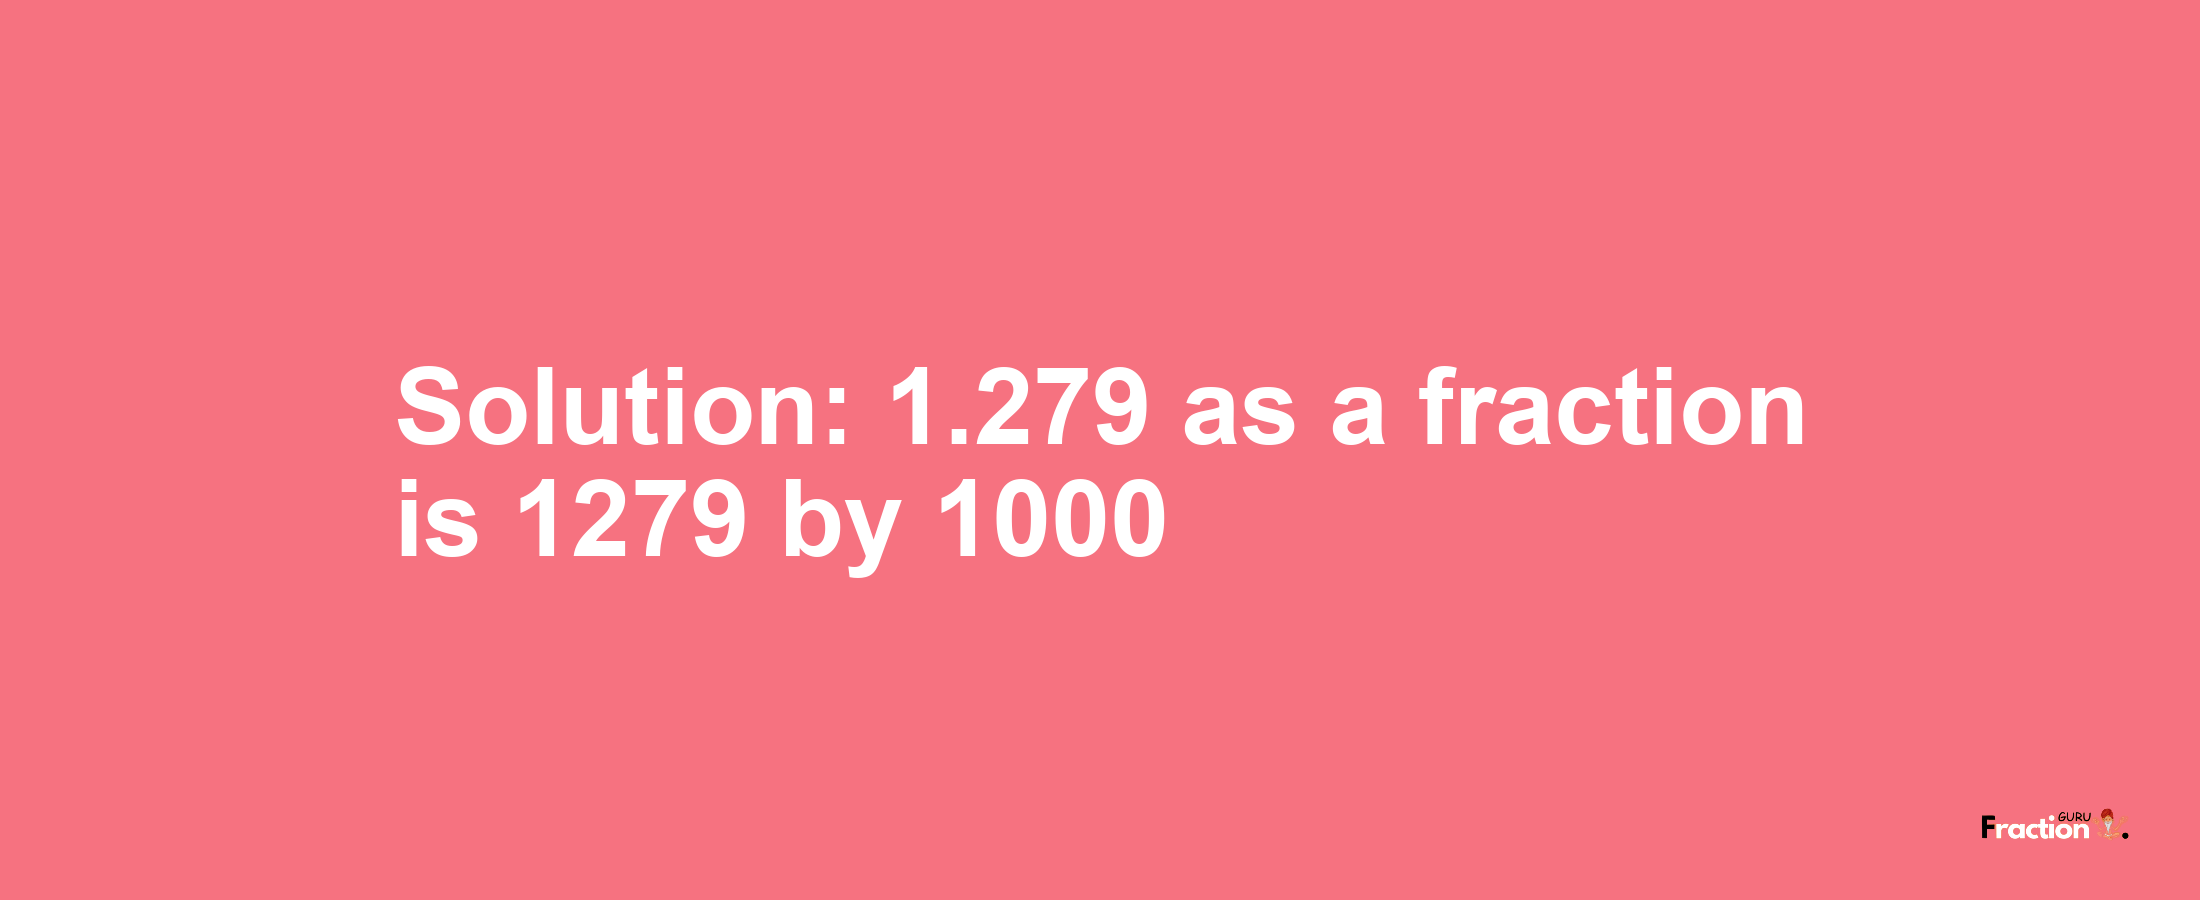 Solution:1.279 as a fraction is 1279/1000